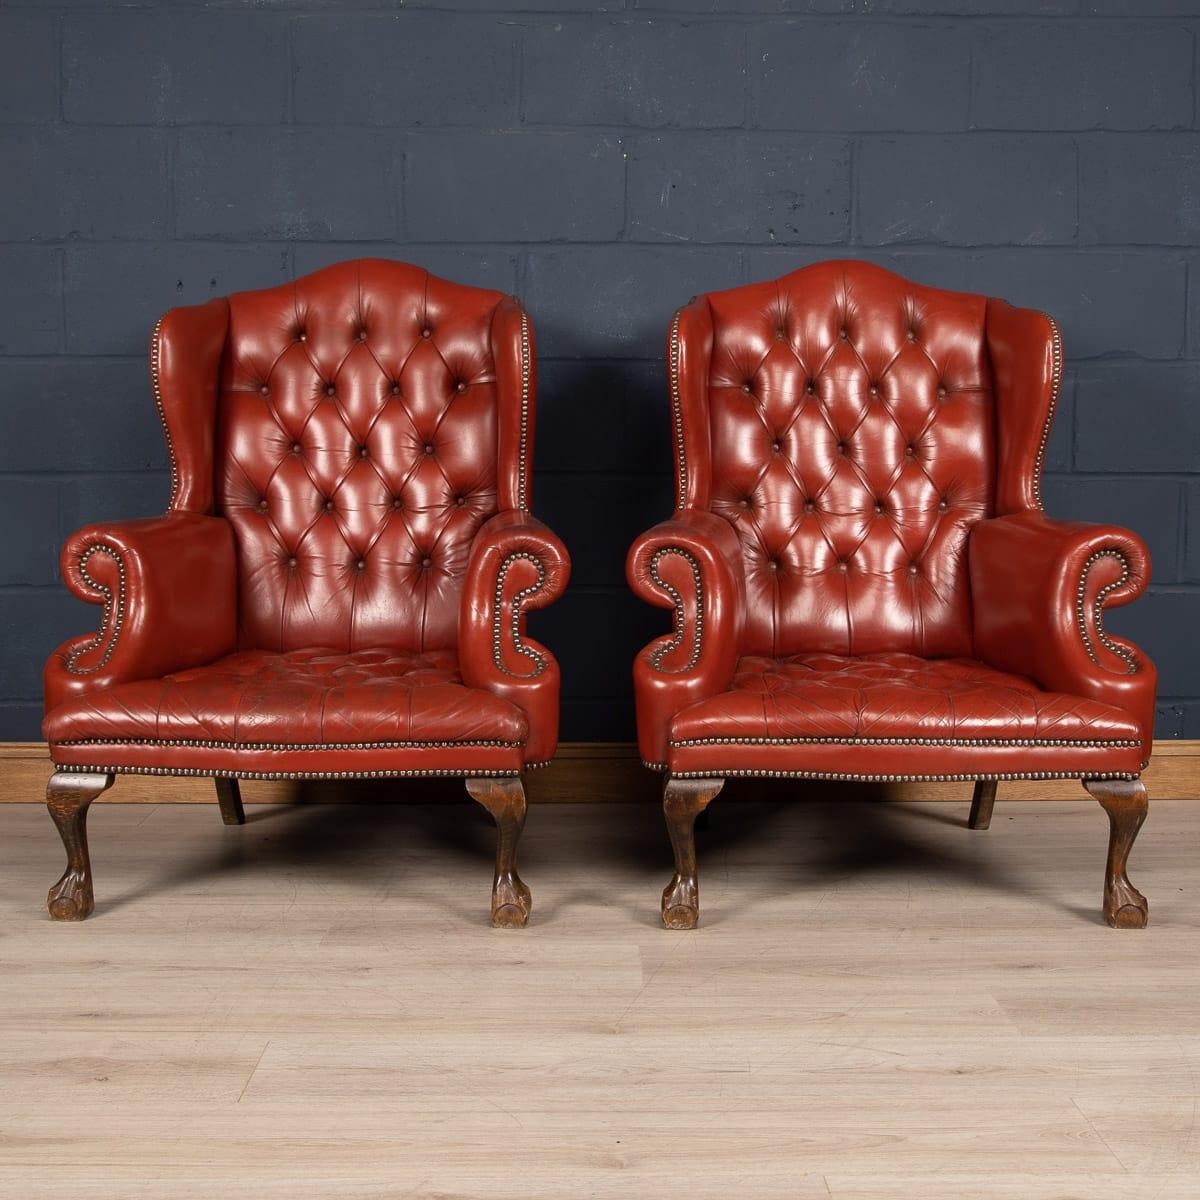 A truly stunning example of English leather craftsmanship, these leather wingback armchairs have an exceptionally rare studded seating and headrest, with brass studs on the armrest. The beautiful color and patina of the leather adds to the warm